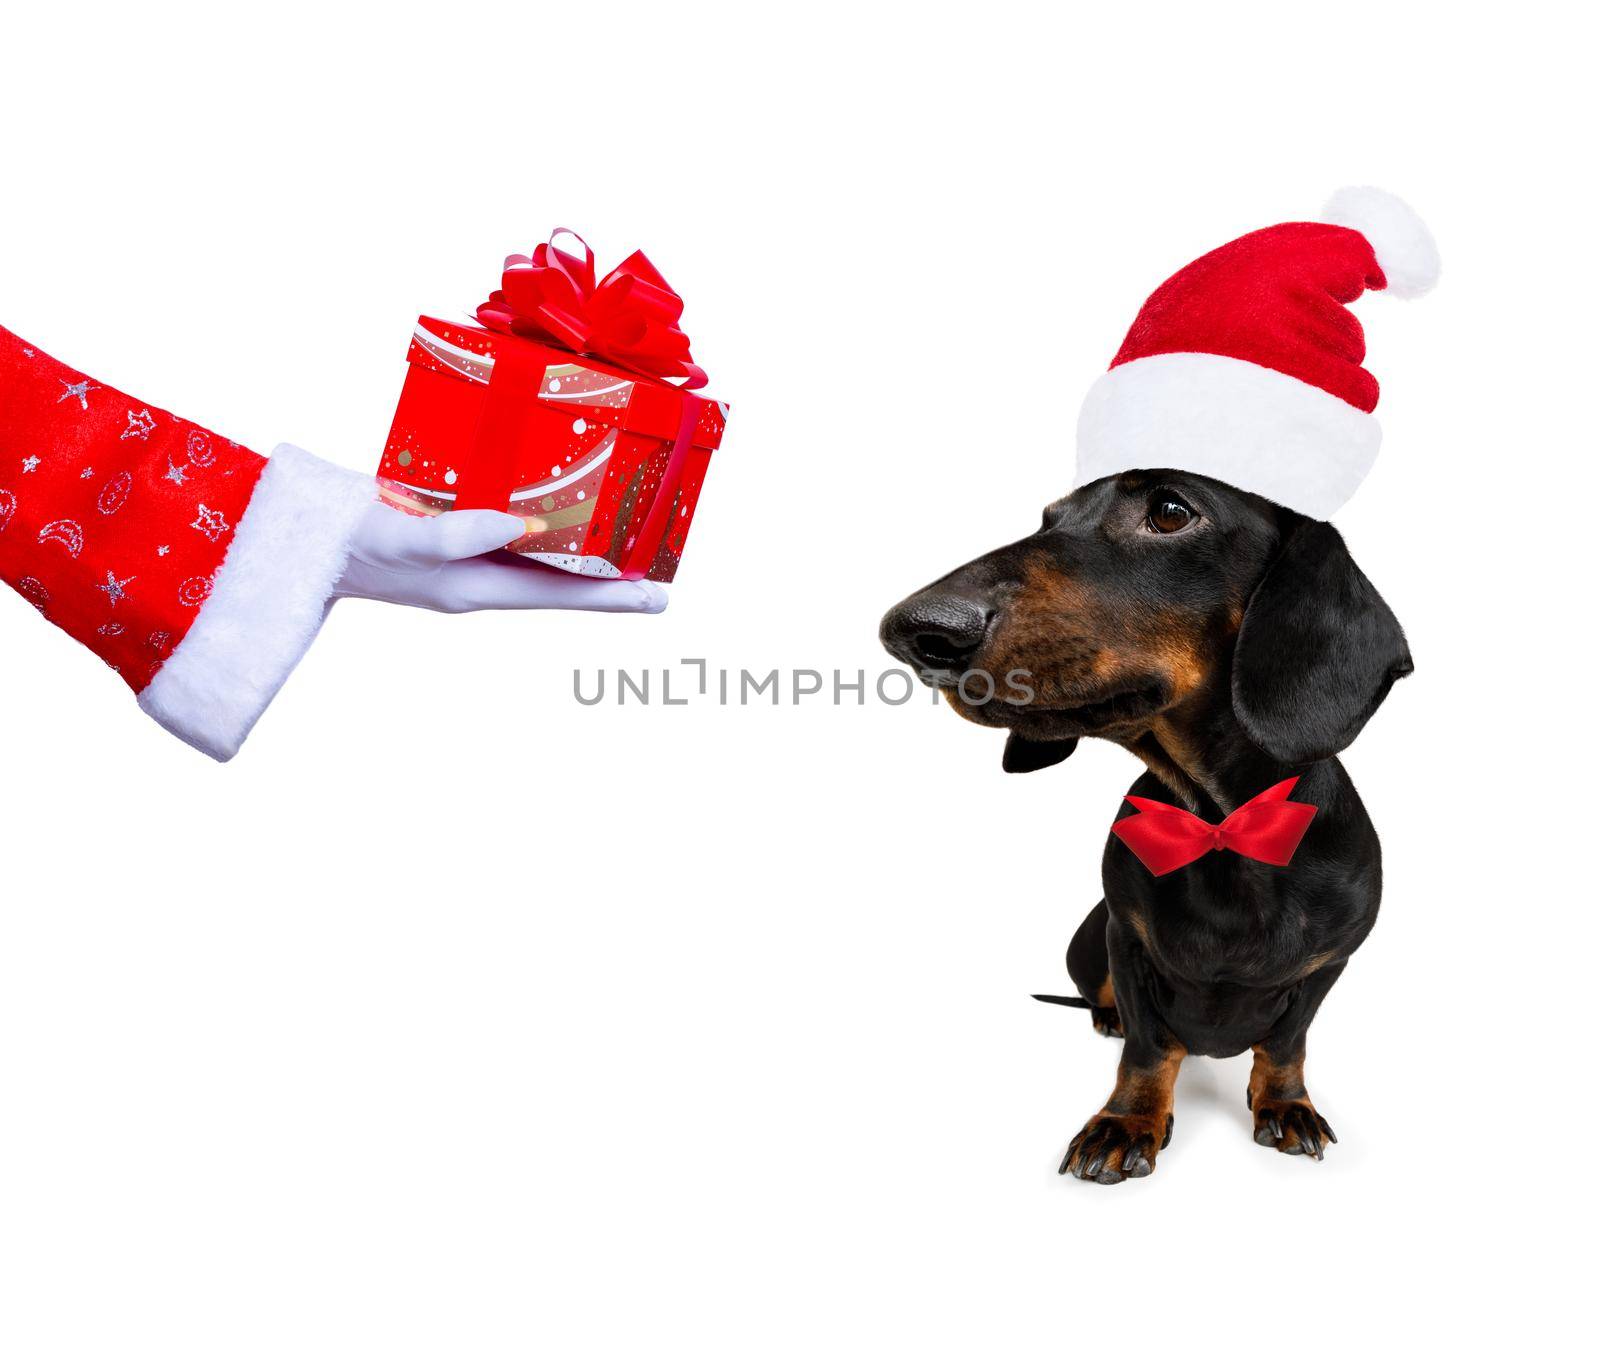 christmas santa claus dachshund sausage dog as a holiday season surprise out of a gift or present box  with red hat , isolated on white background with stars falling and noel hand